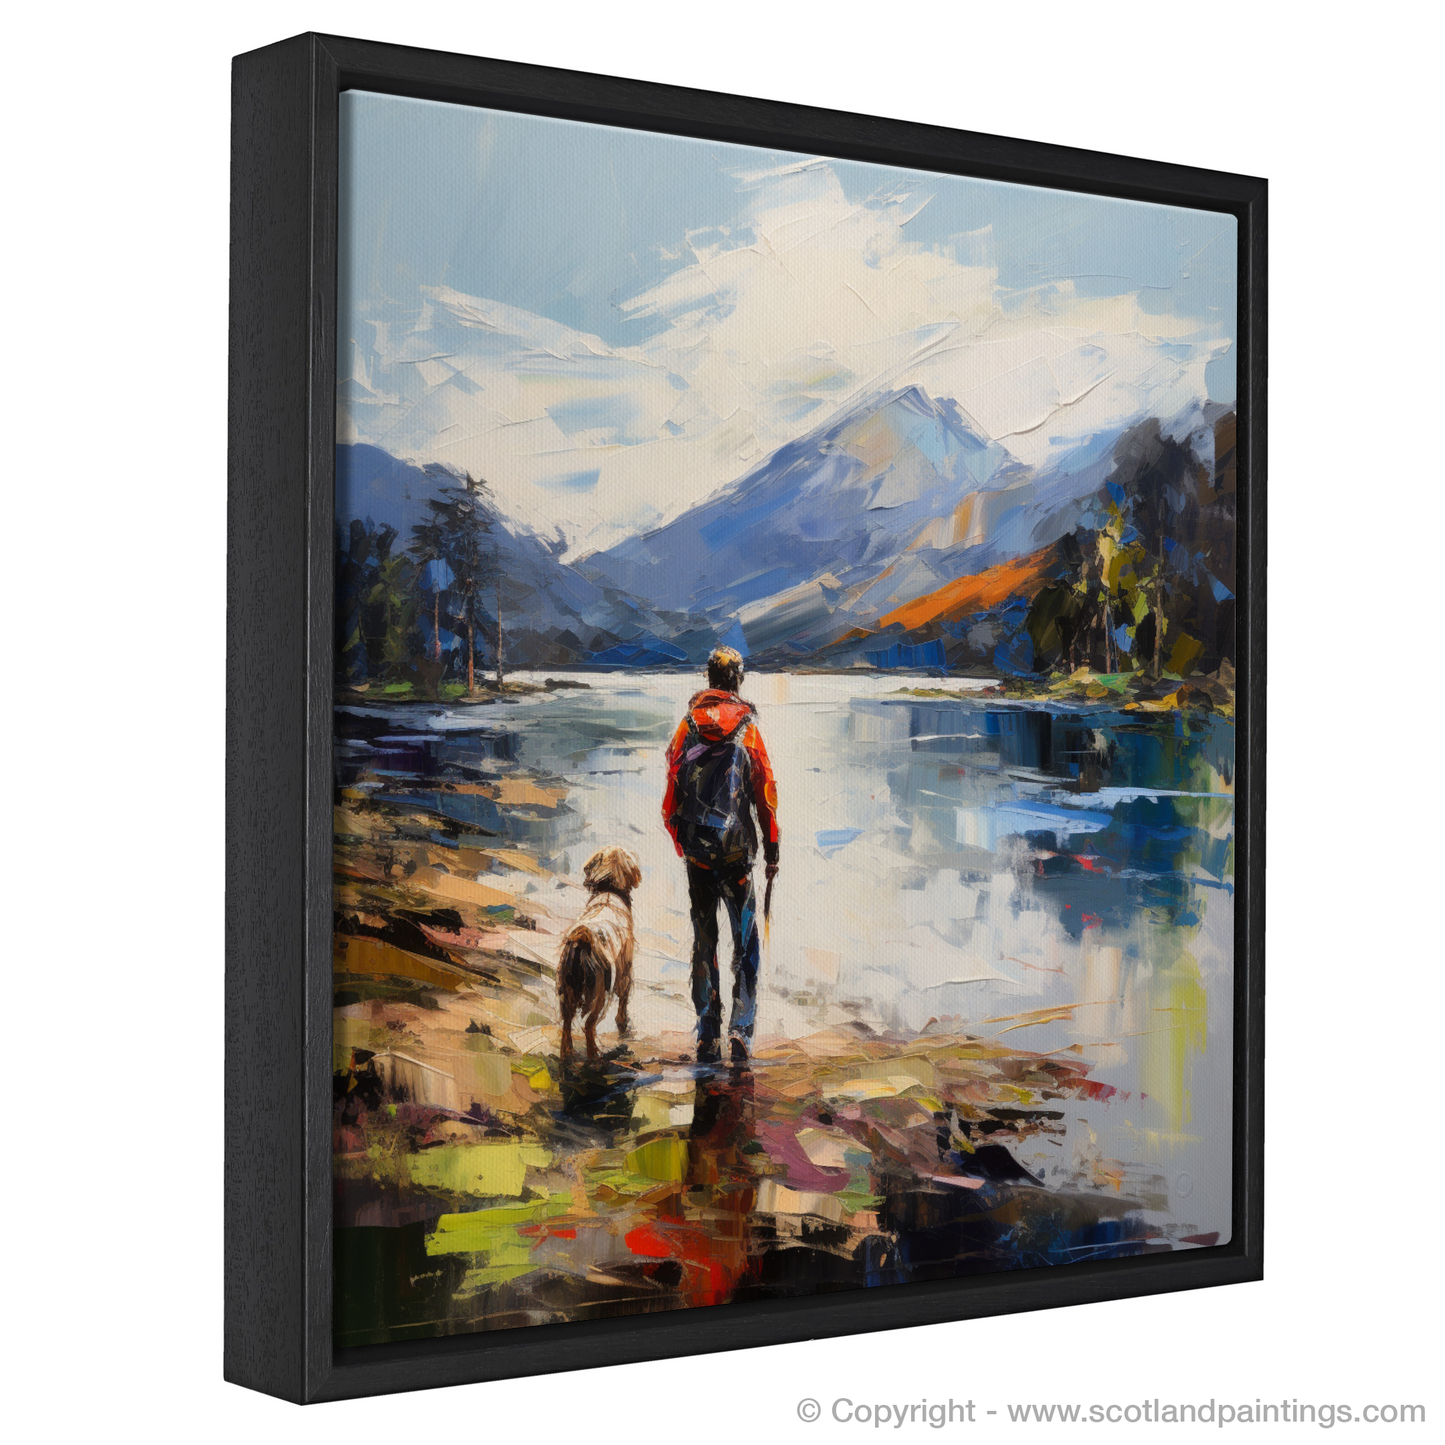 Painting and Art Print of A man walking dog at the side of Loch Lomond entitled "Walking with a Friend by Loch Lomond - An Expressionist Journey".